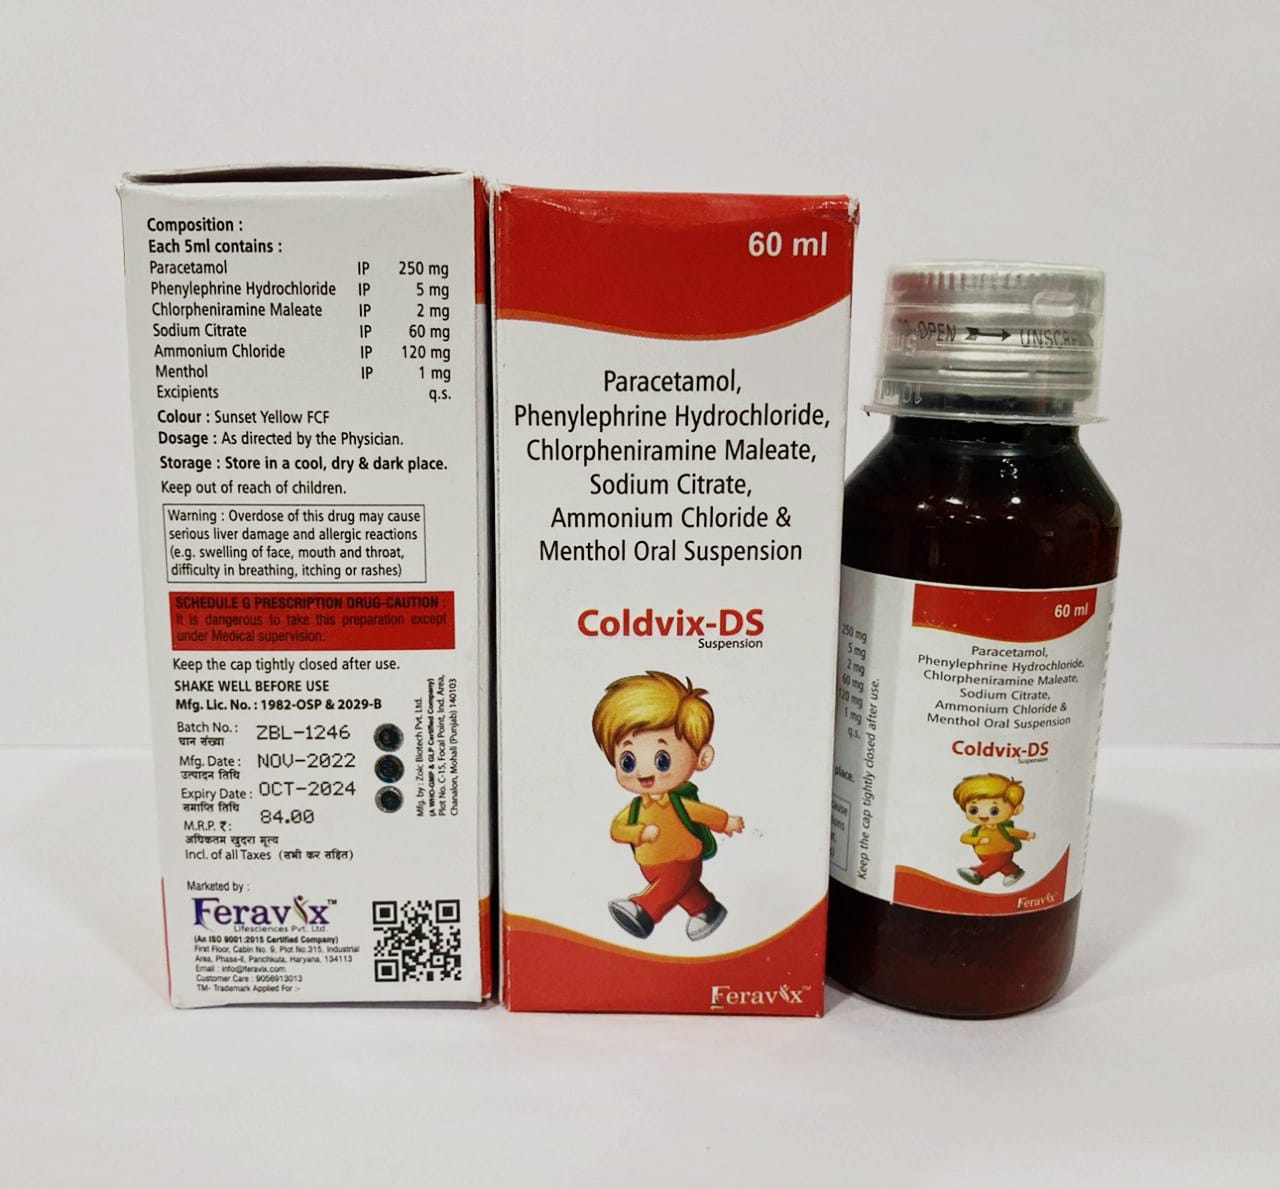 Product Name: COLDVIX DS SYRUP, Compositions of COLDVIX DS SYRUP are PARACETAMOL 250MG Phenylephrine Hydrochloride 5mg, Chlorpheniramine Maleate 2mg, sodium citrate 60 mg, Ammonium Chlroide 120mg, Menthol 1mg Excipients q s - Feravix Lifesciences